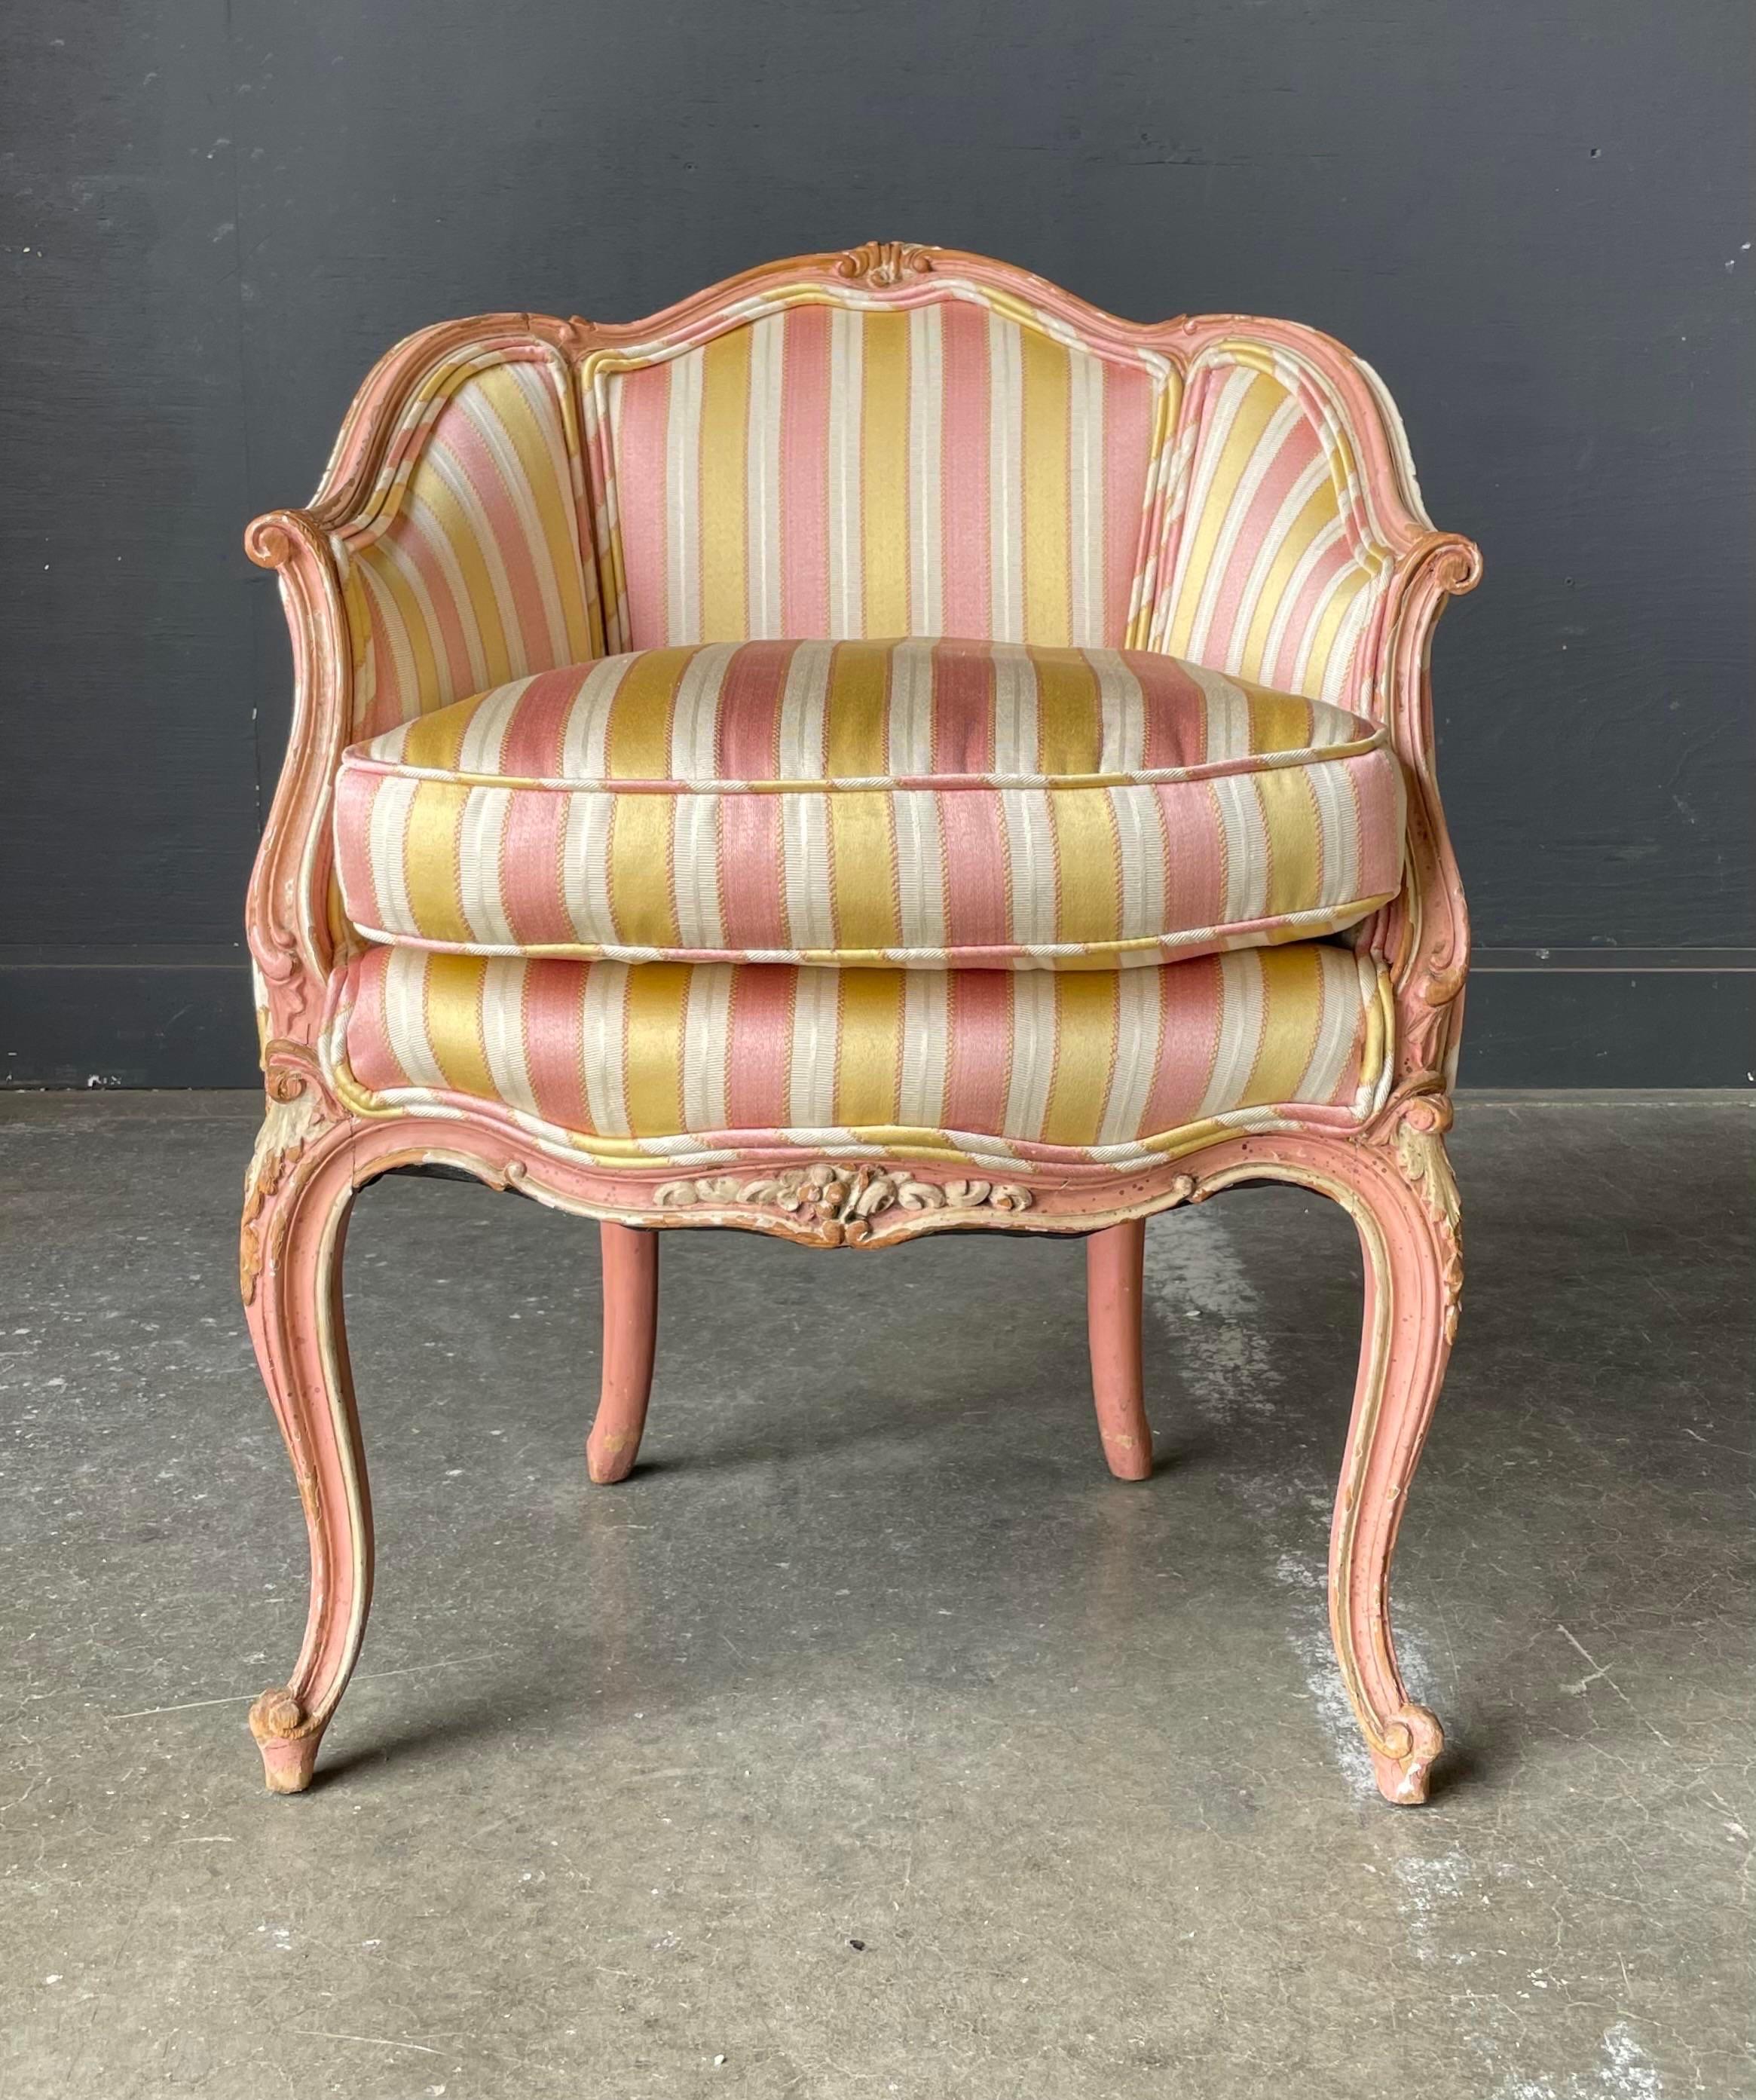 Louis XV Style Bergere Chairs - a Pair In Good Condition For Sale In Hudson, NY